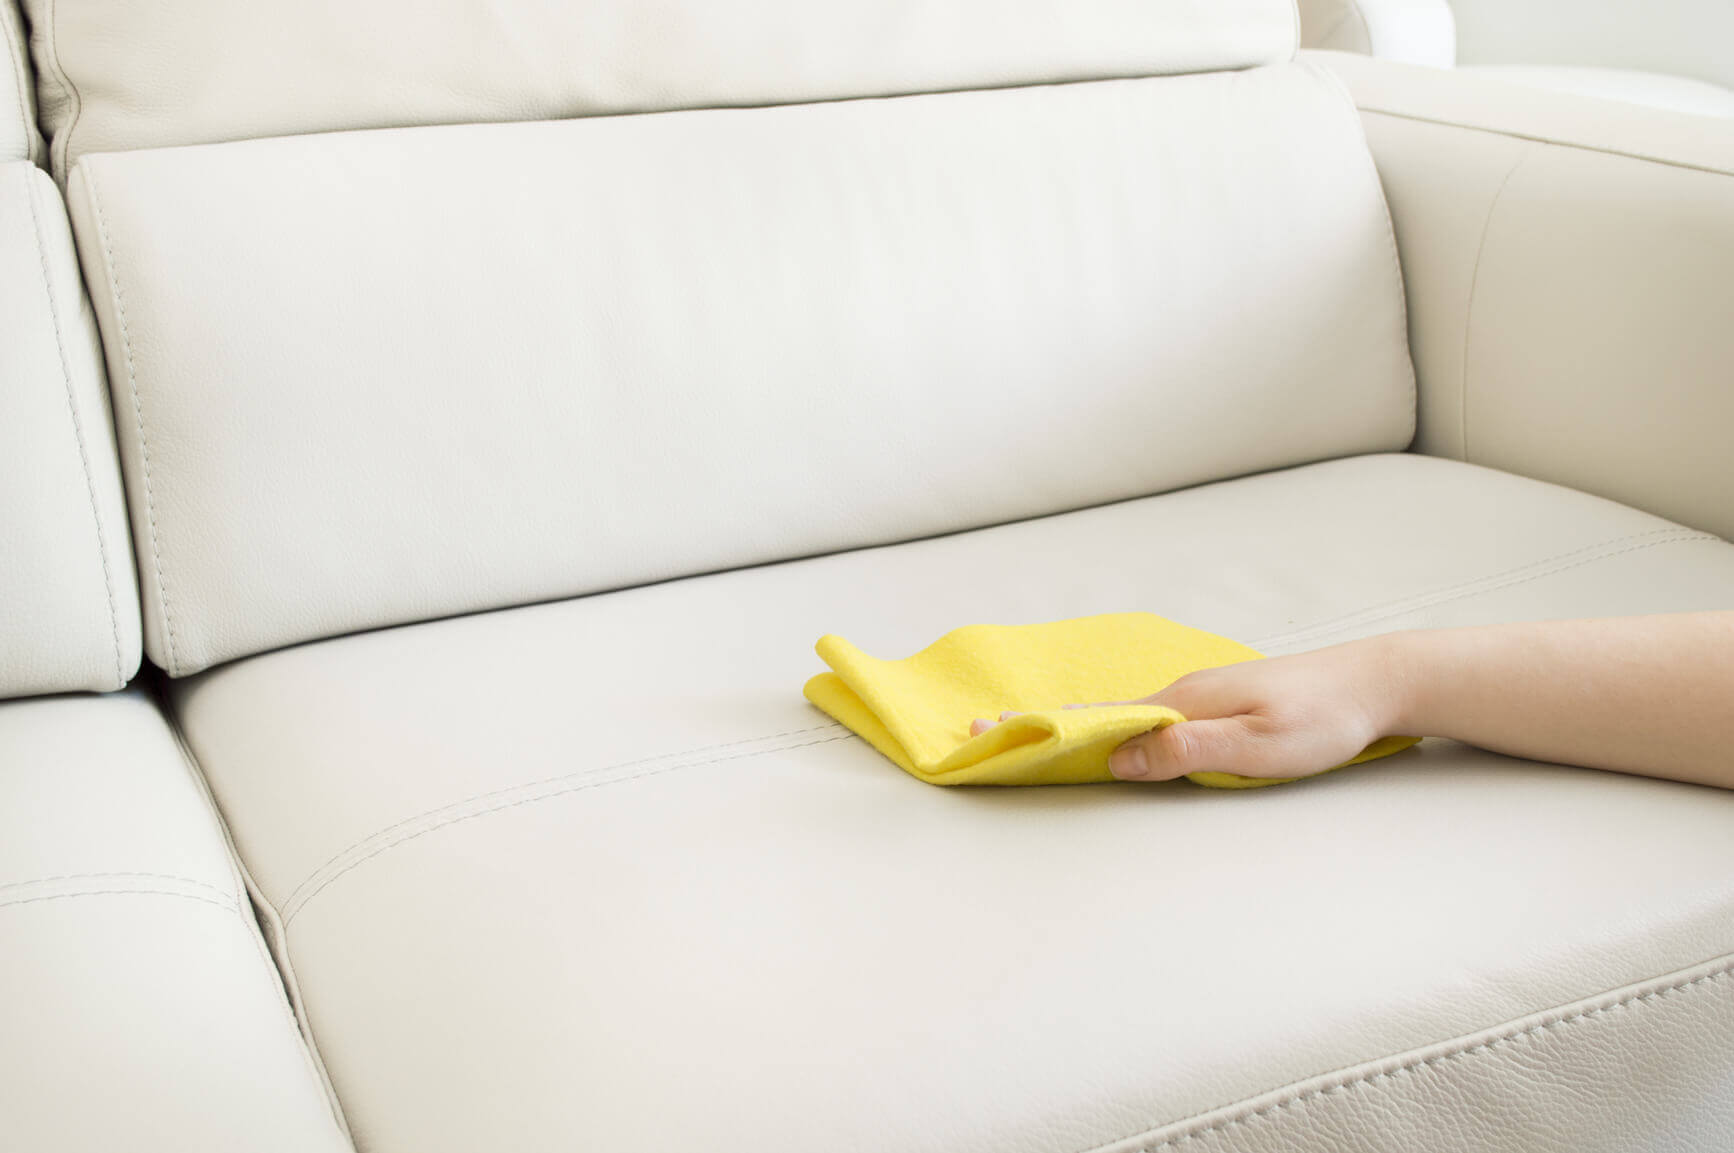 residential cleaning services